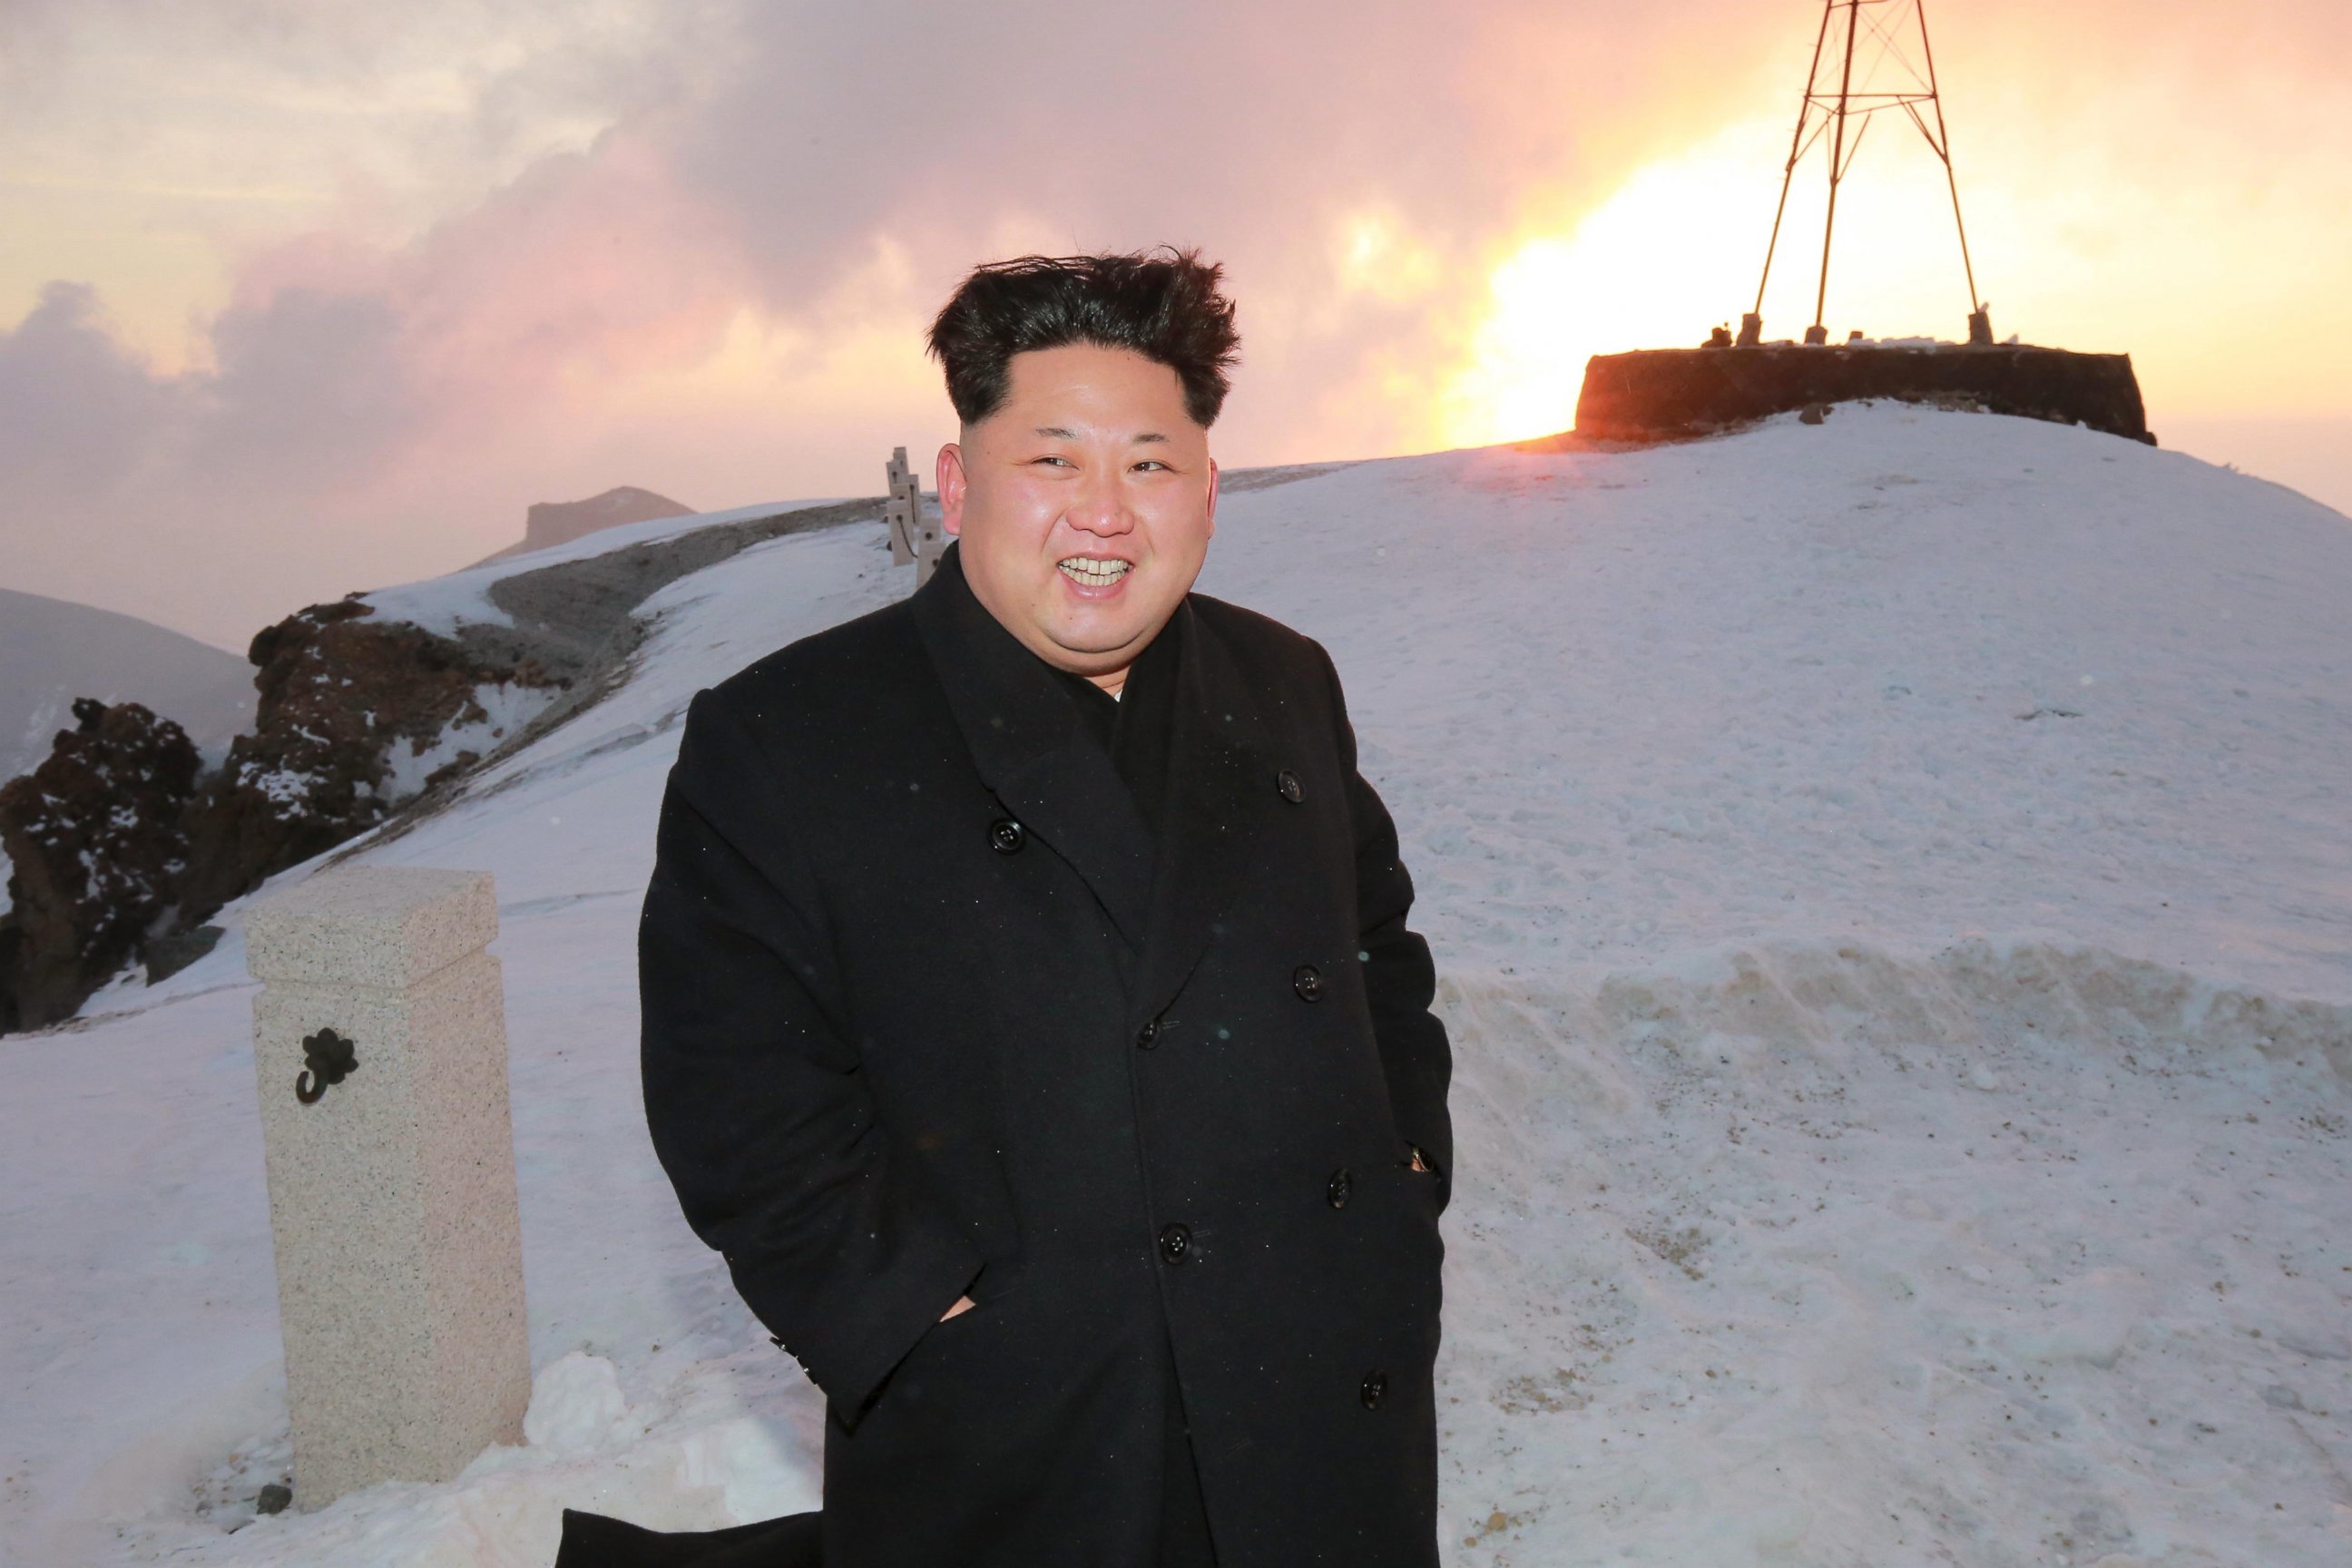 PHOTO: Kim Jong Un is seen atop Mt. Paektu in North Korea, in images released by state media April 19, 2015.
